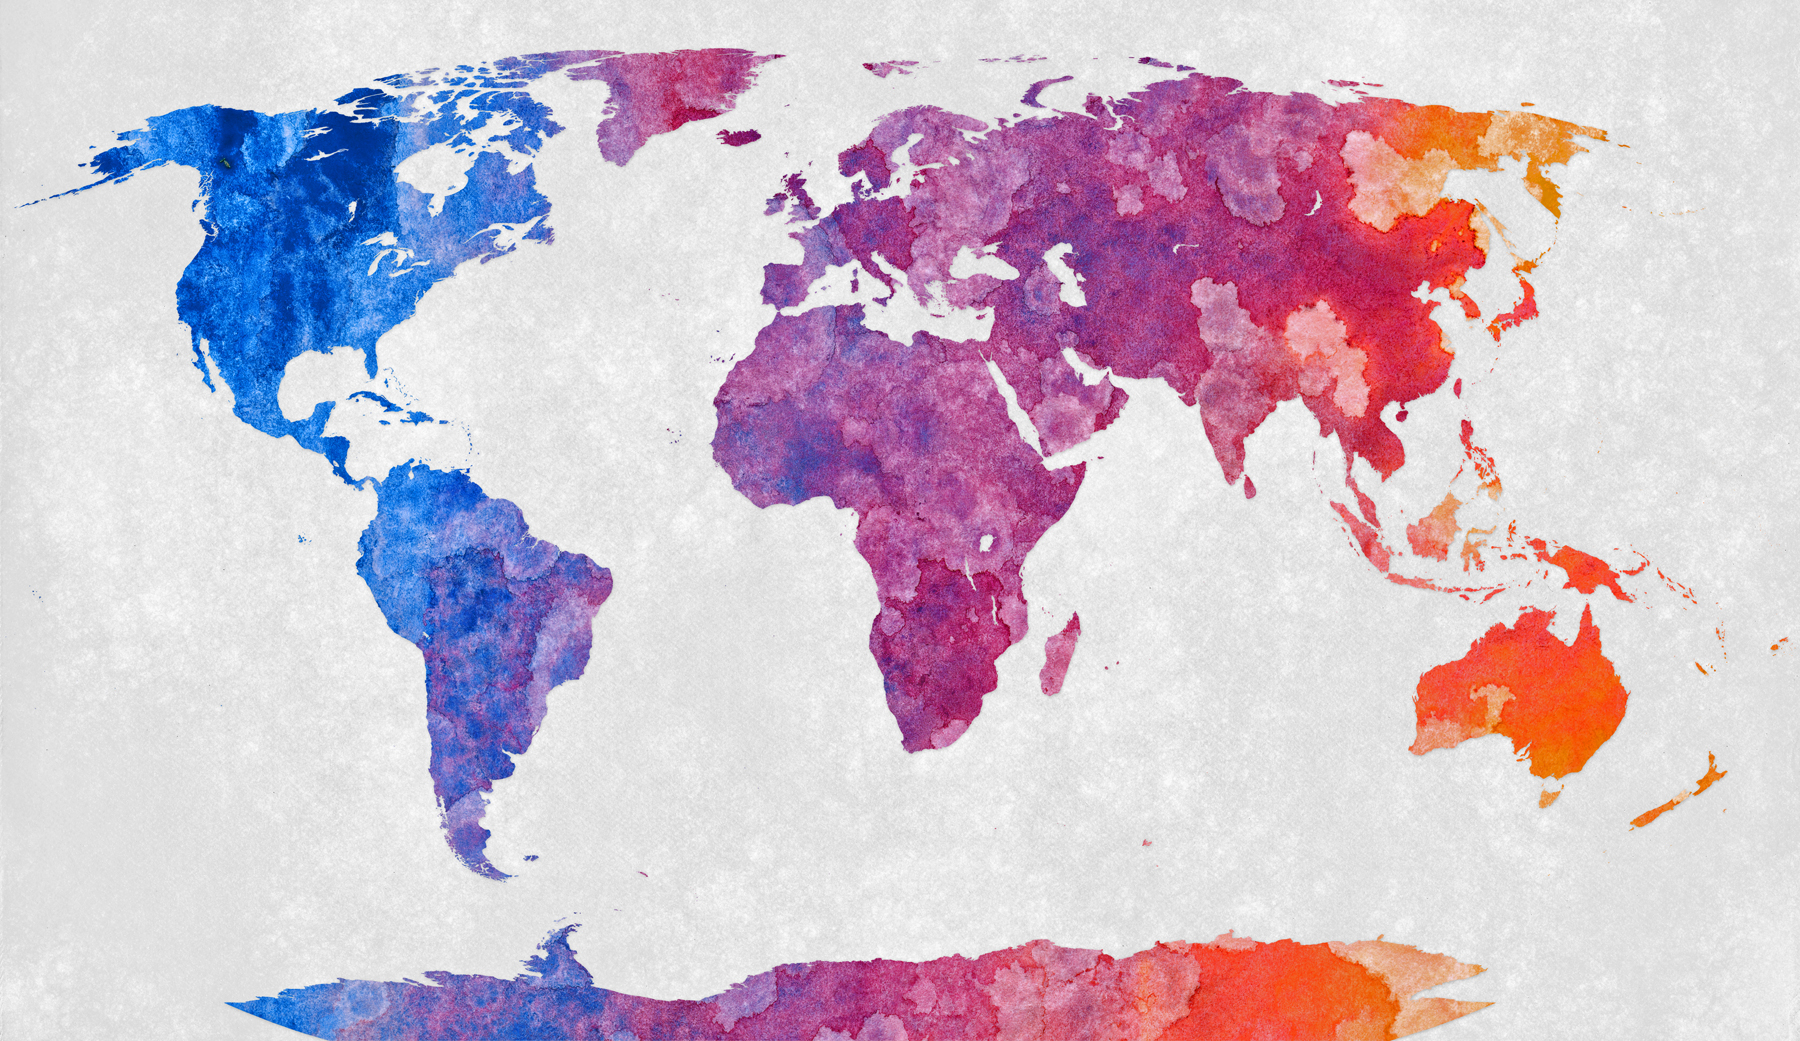 World map with an abstract acrylic texture against a white grungy background